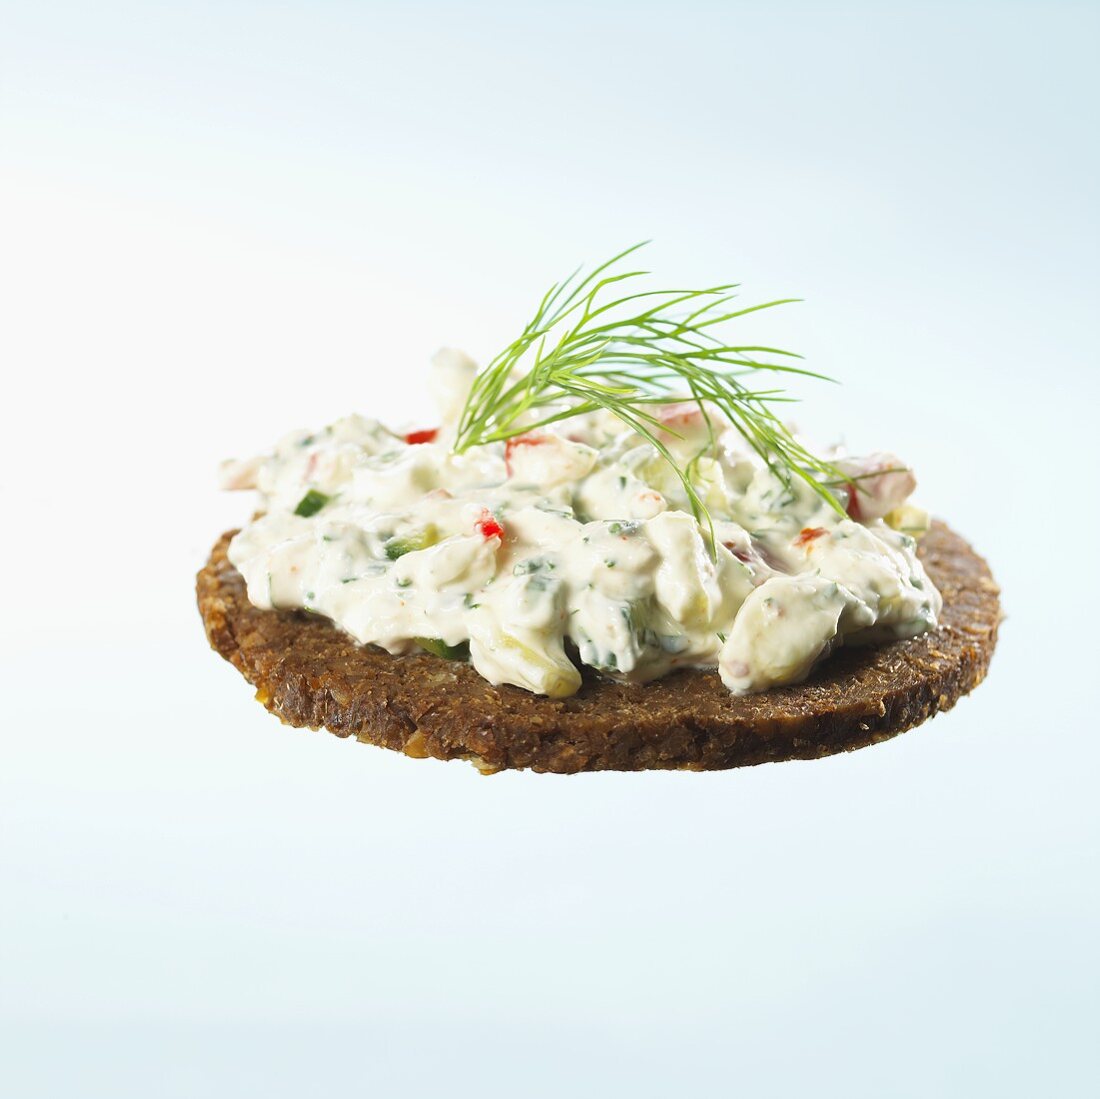 Quark with vegetables and herbs on whole grain bread